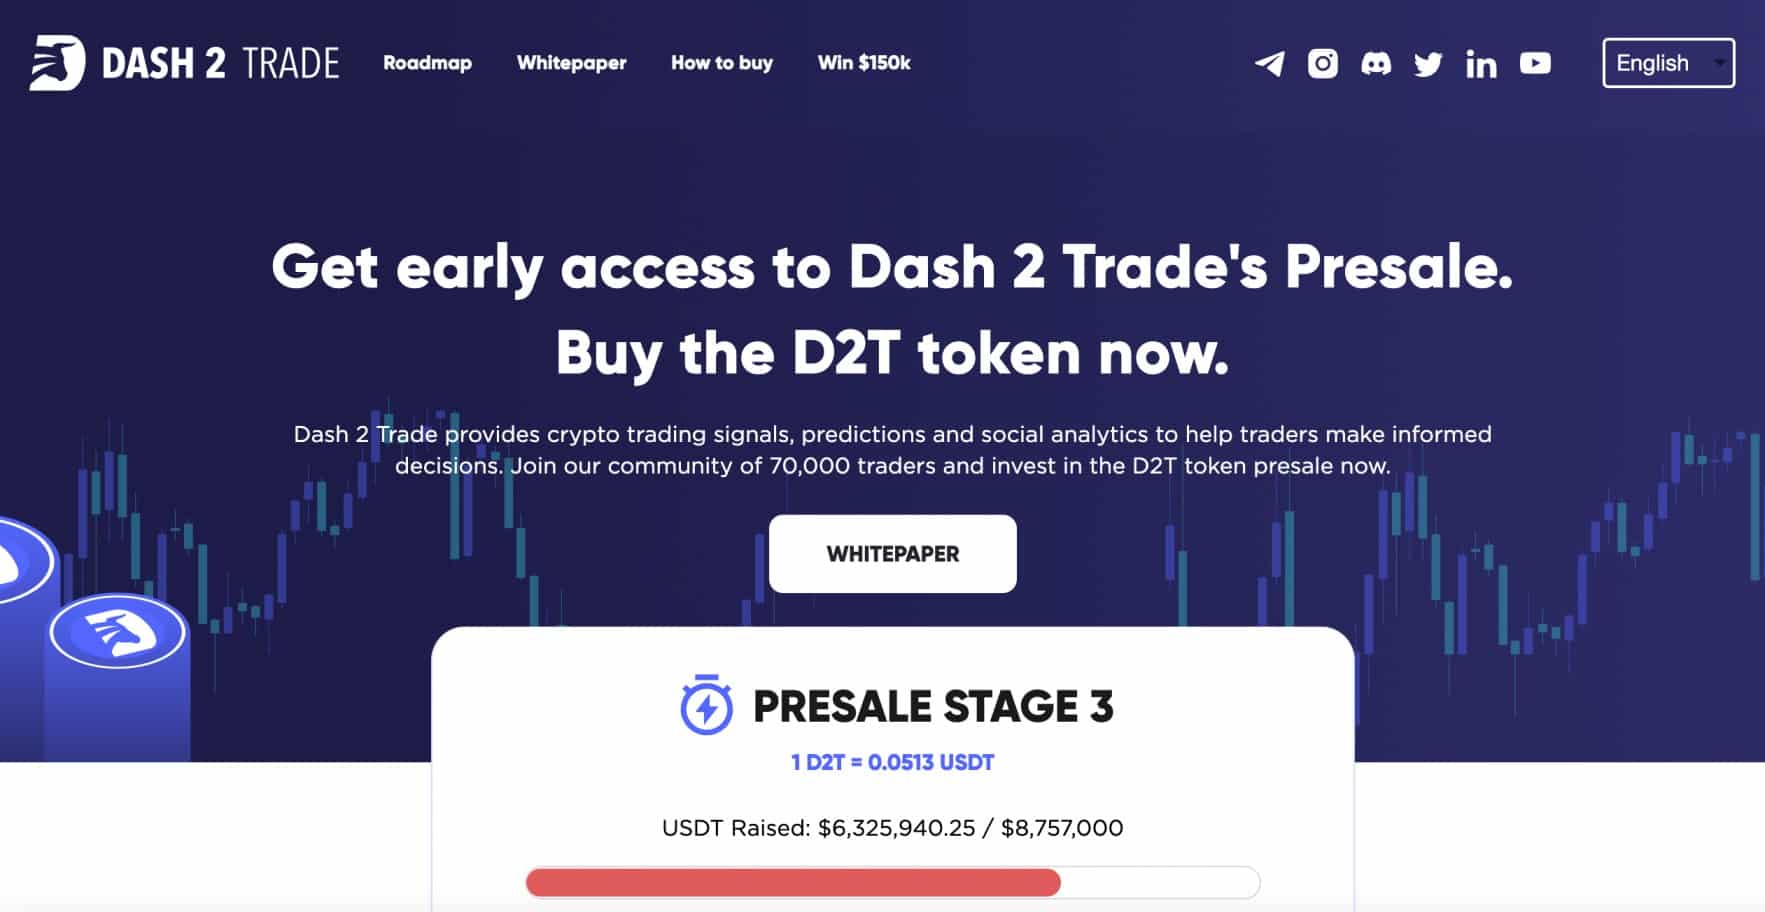 What is Dash 2 Trade?